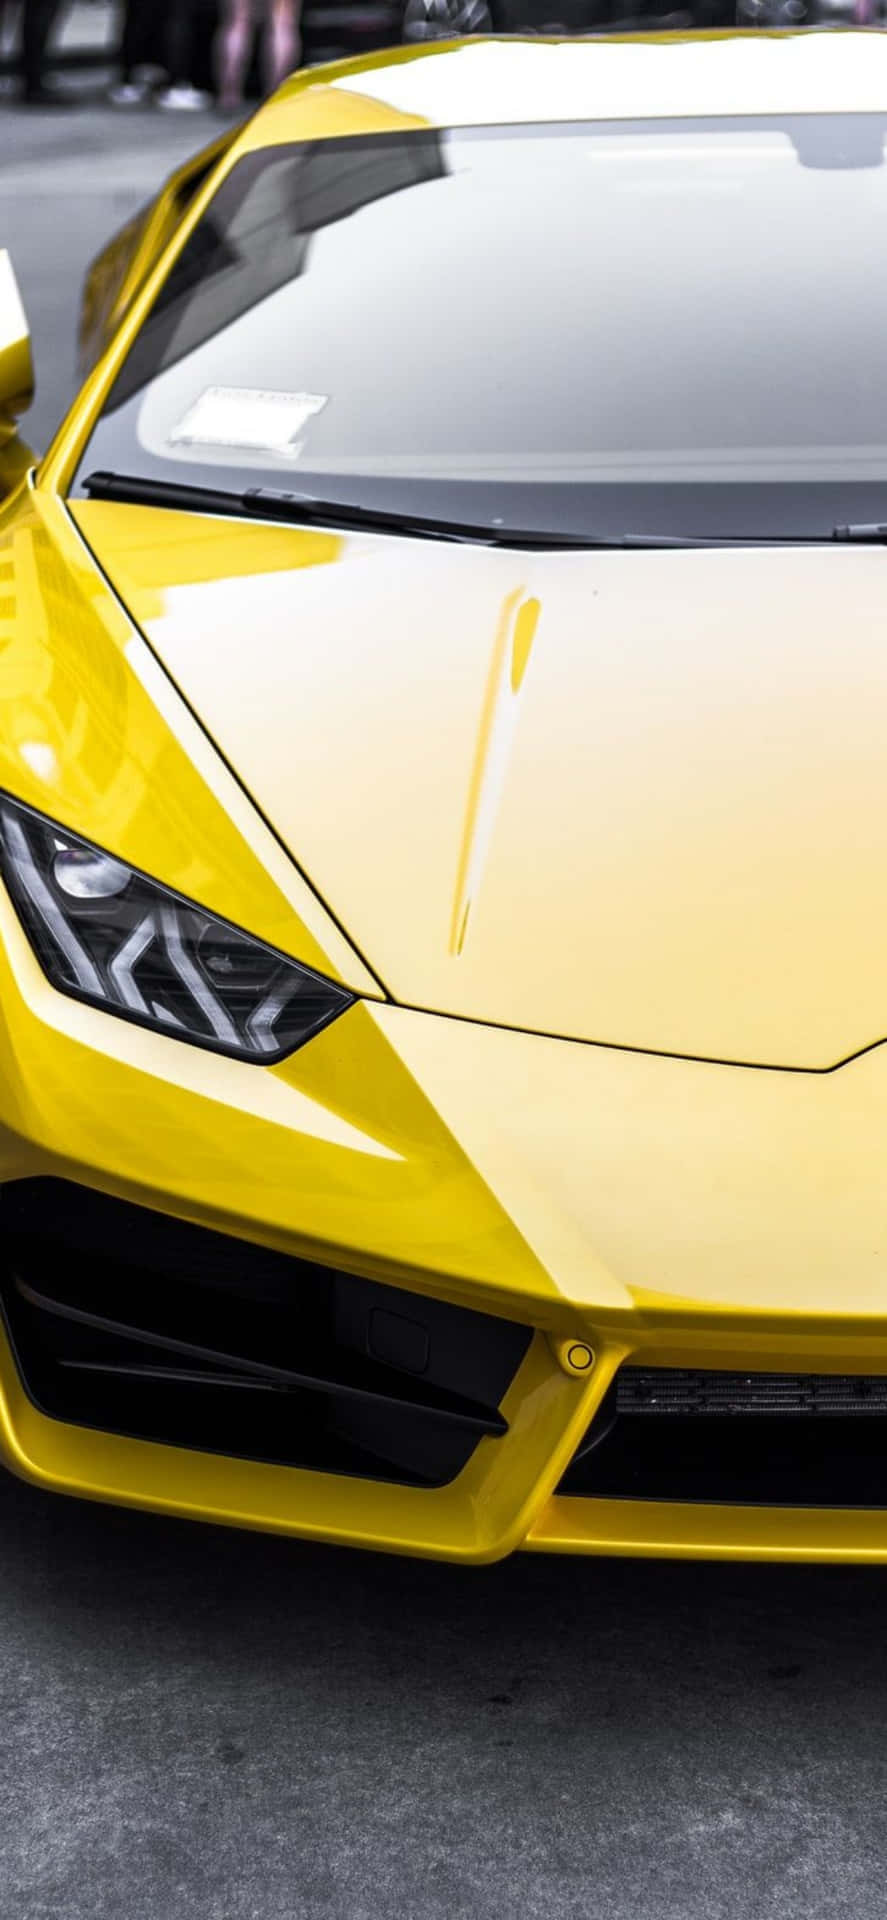 Get Ready to Experience the Unparalleled Power of the Iphone X Lamborghini